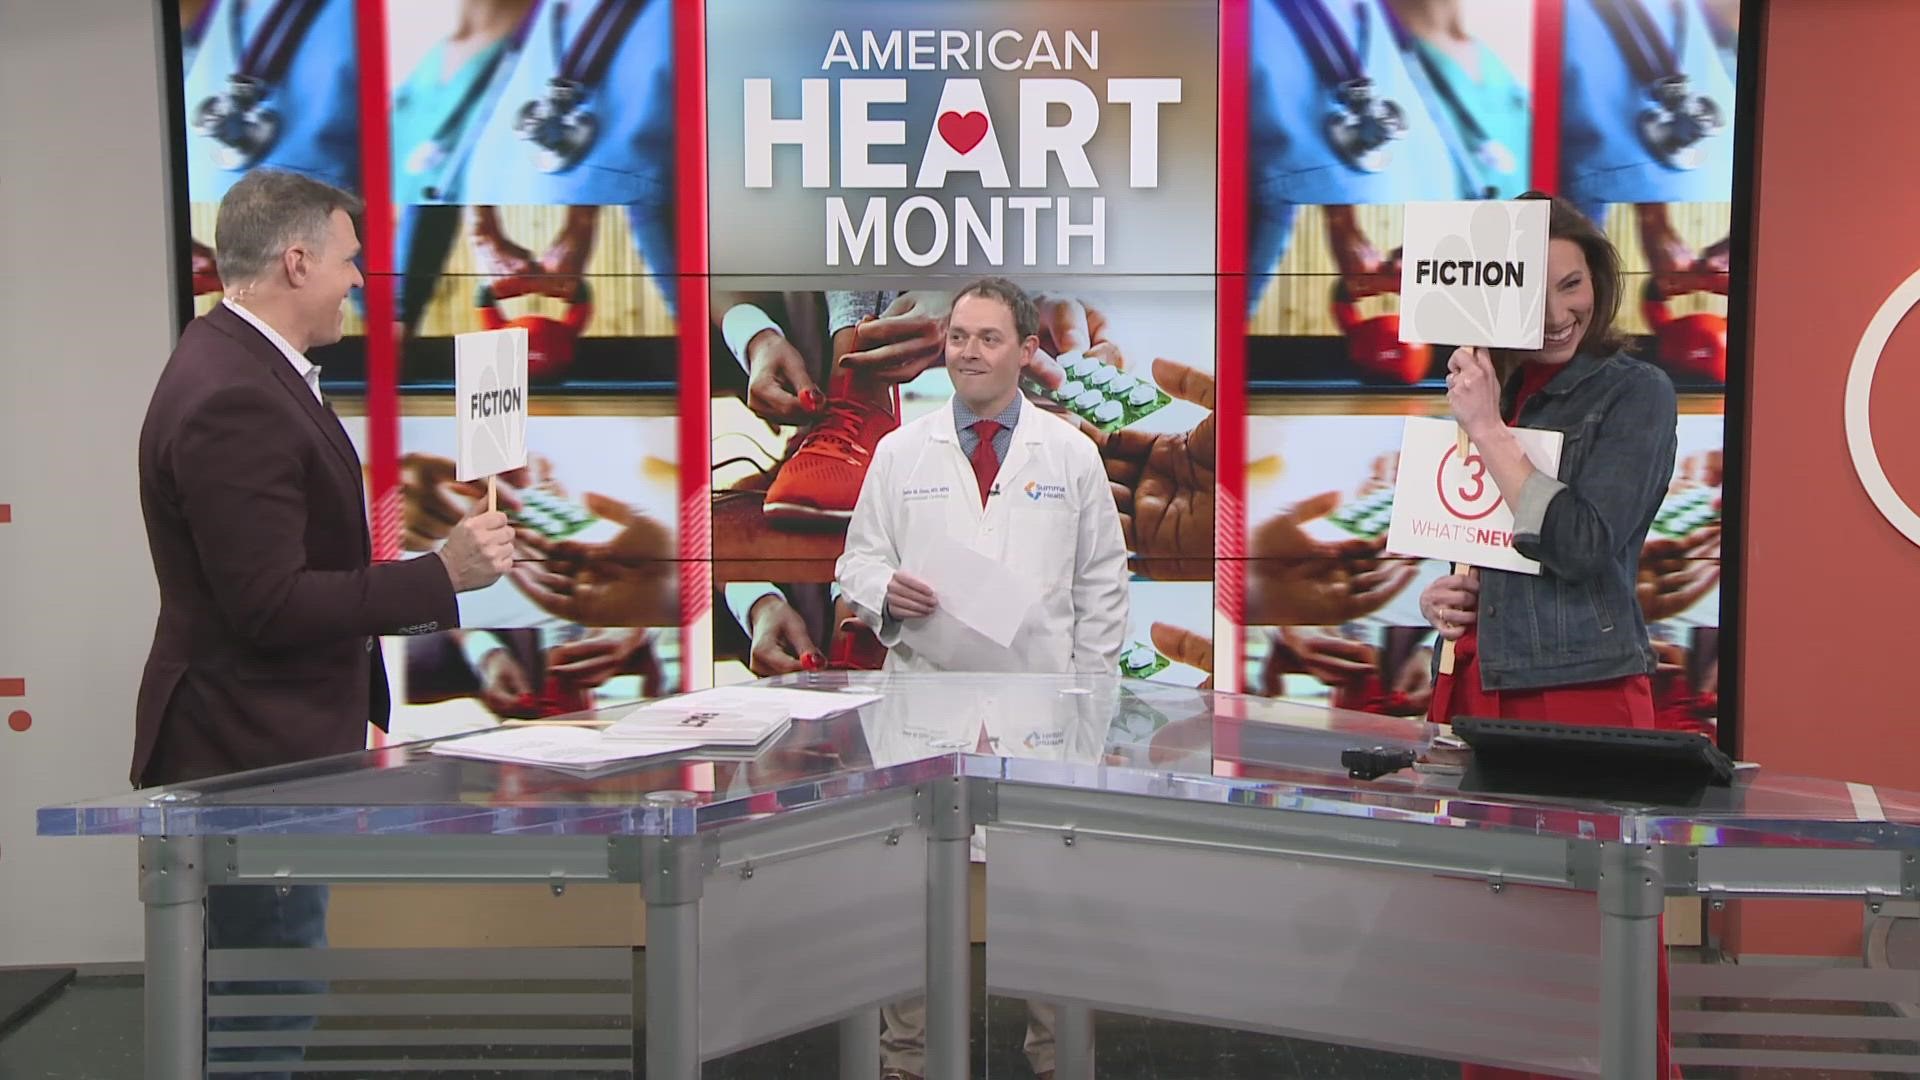 February is American Heart Month. To commemorate the occasion, Betsy and Jay are answering trivia questions regarding heart health.